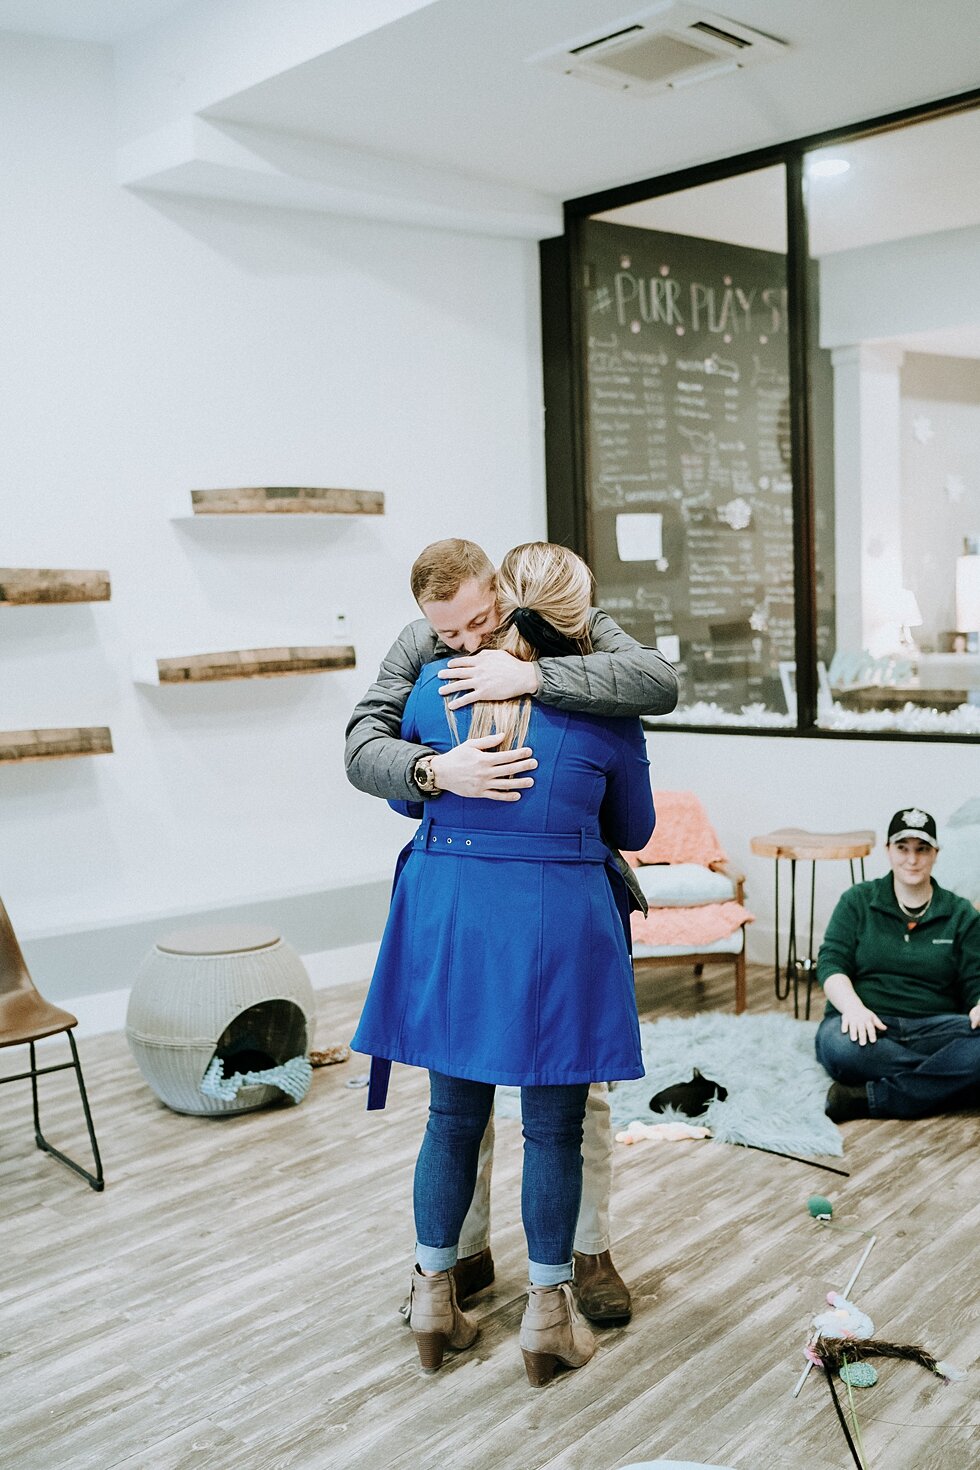  Their shared love of cats made for the purrfect distraction so he could arrange to pop the question! #engagementgoals #proposalphotographer #engaged #photographedengagement #kentuckyphotographer #indianaphotographer #louisvillephotographer #proposal